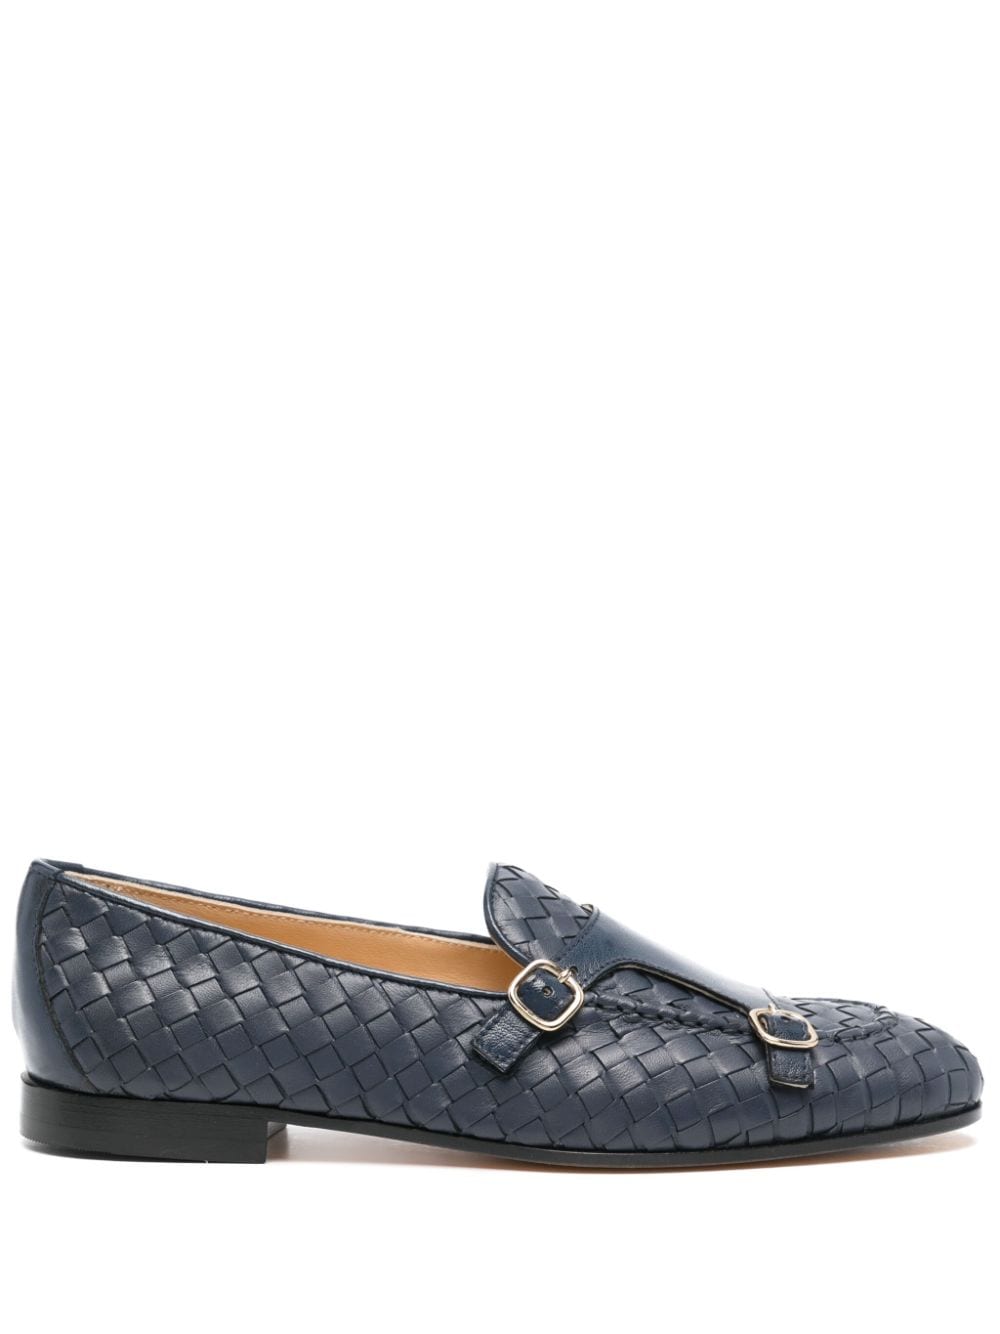 Doucal's interwoven leather loafers - Blue von Doucal's